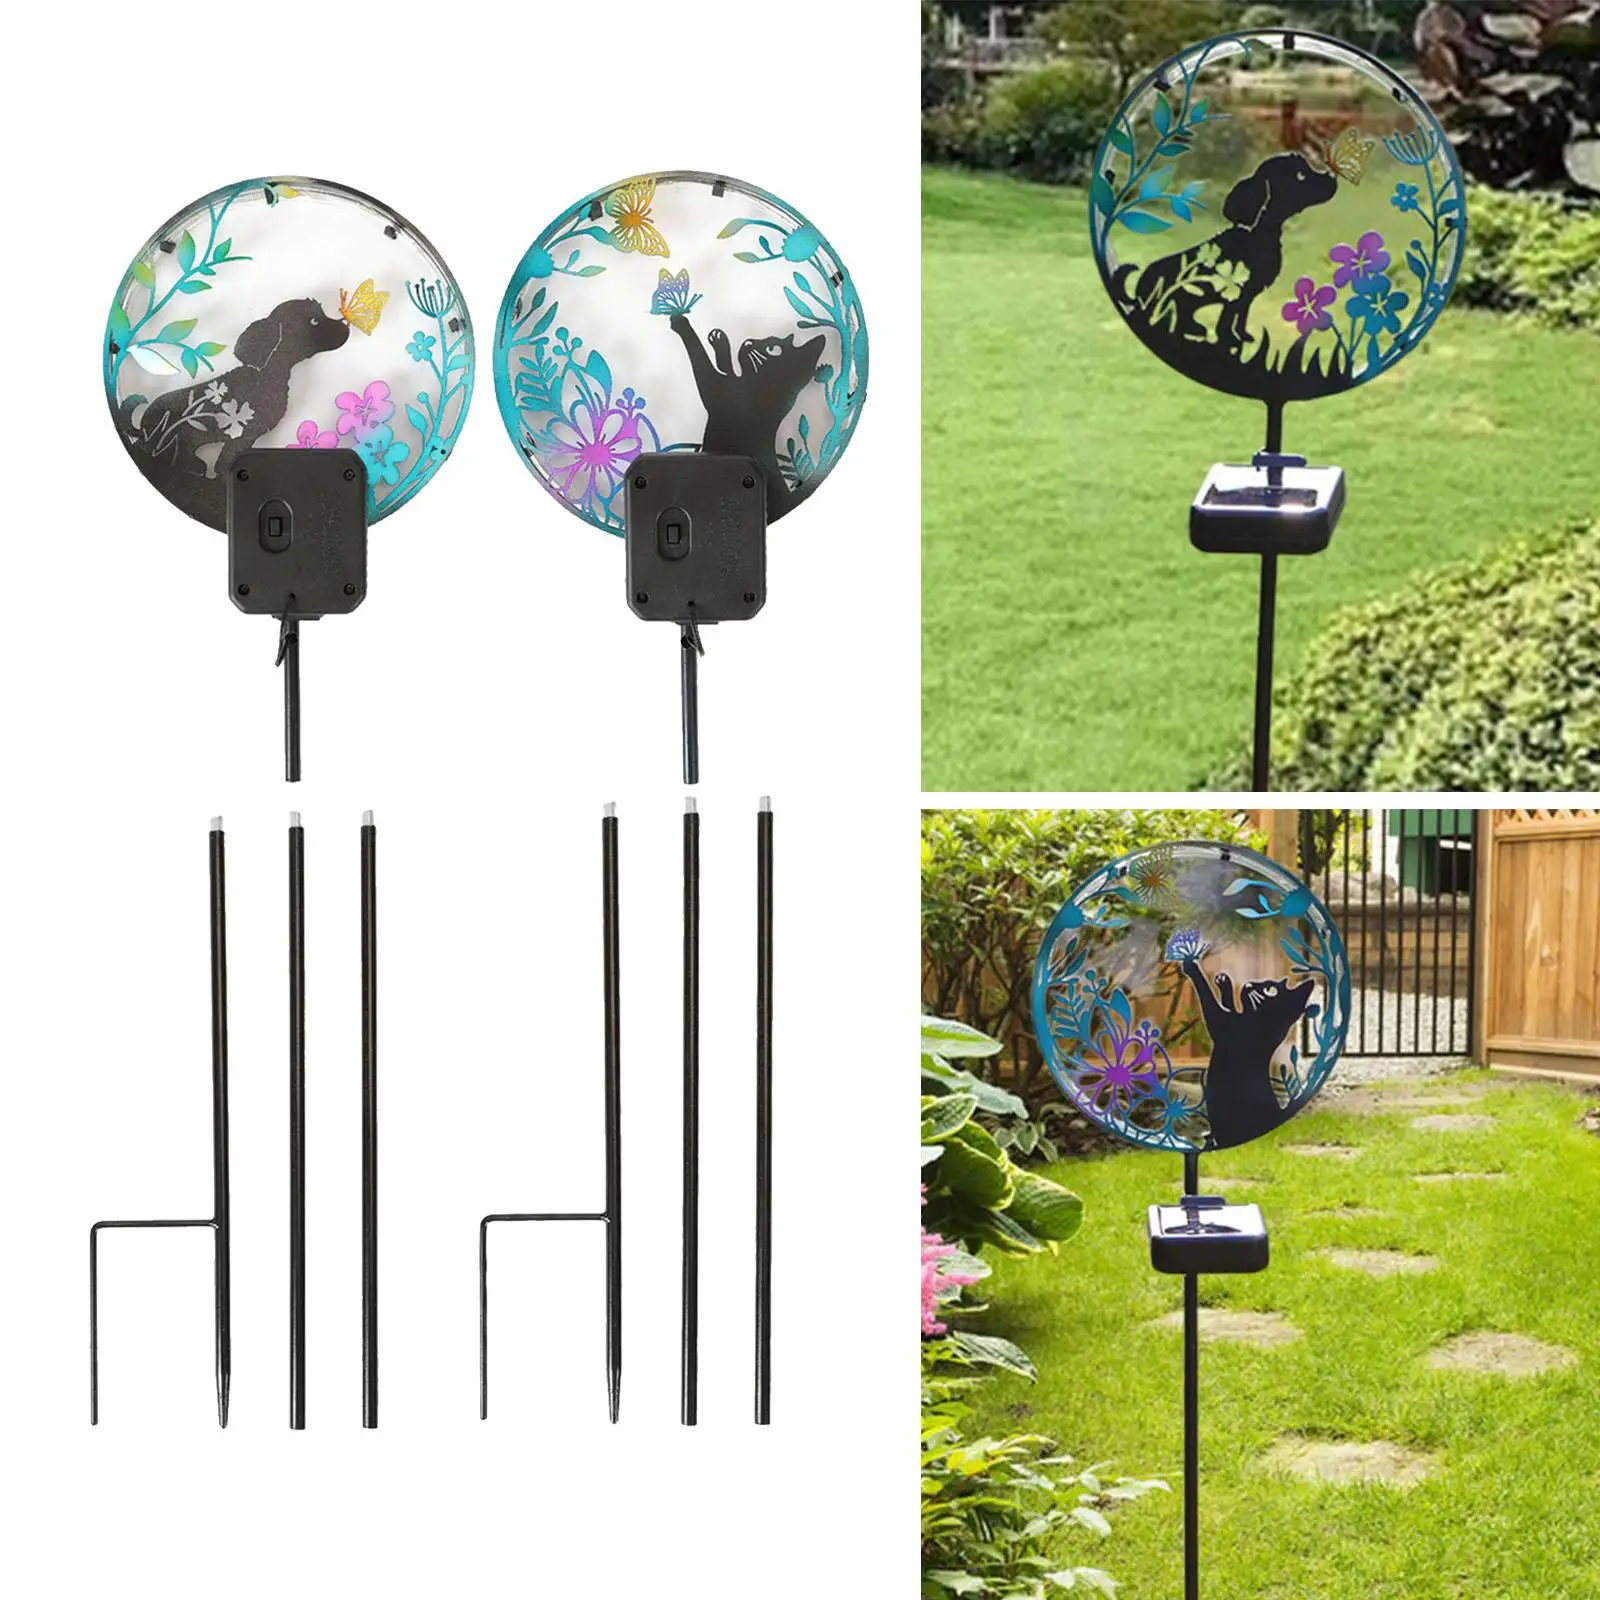 Garden Stake Light Decorative Iron Art Landscape Lamp for Patio Pathway Lawn